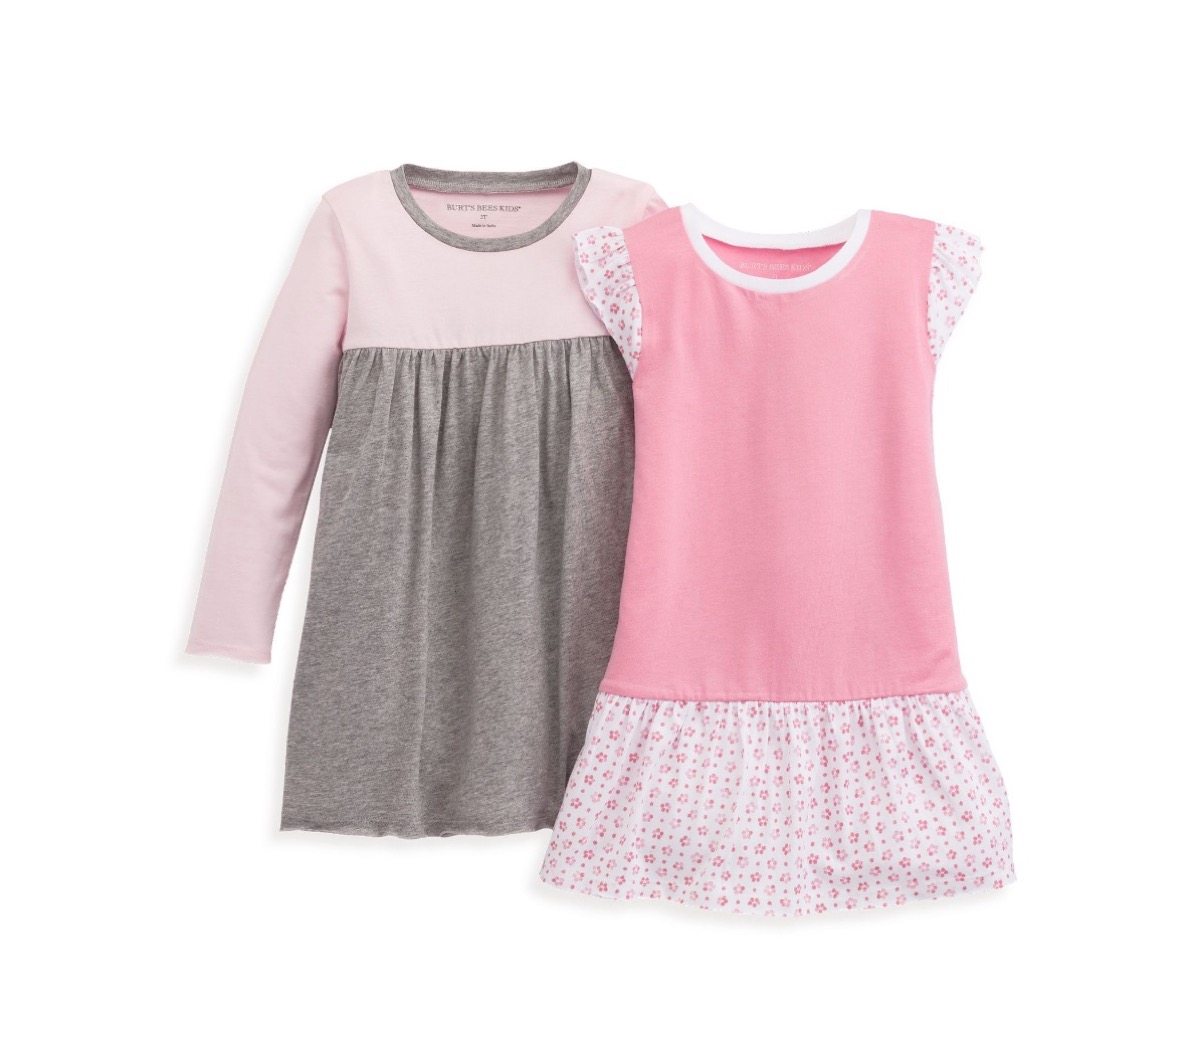 two baby dresses, end of summer sales 2019